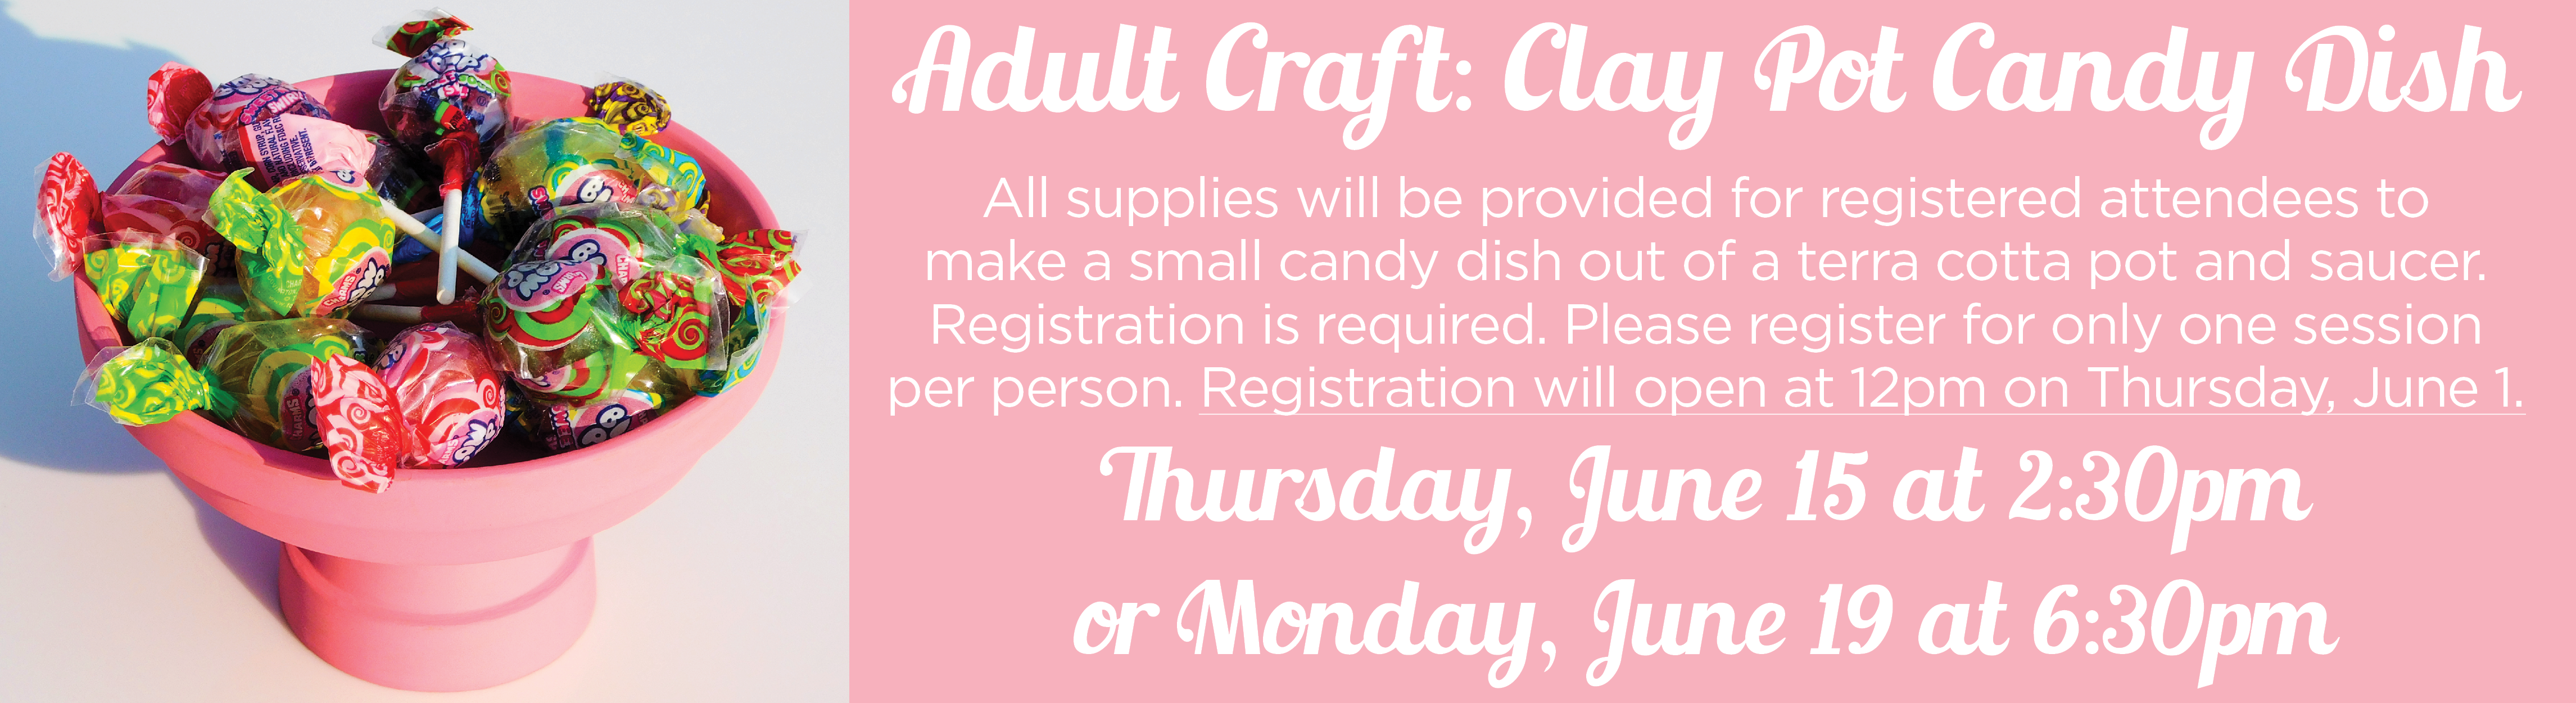 Adult Craft – Clay Pot Candy Dish